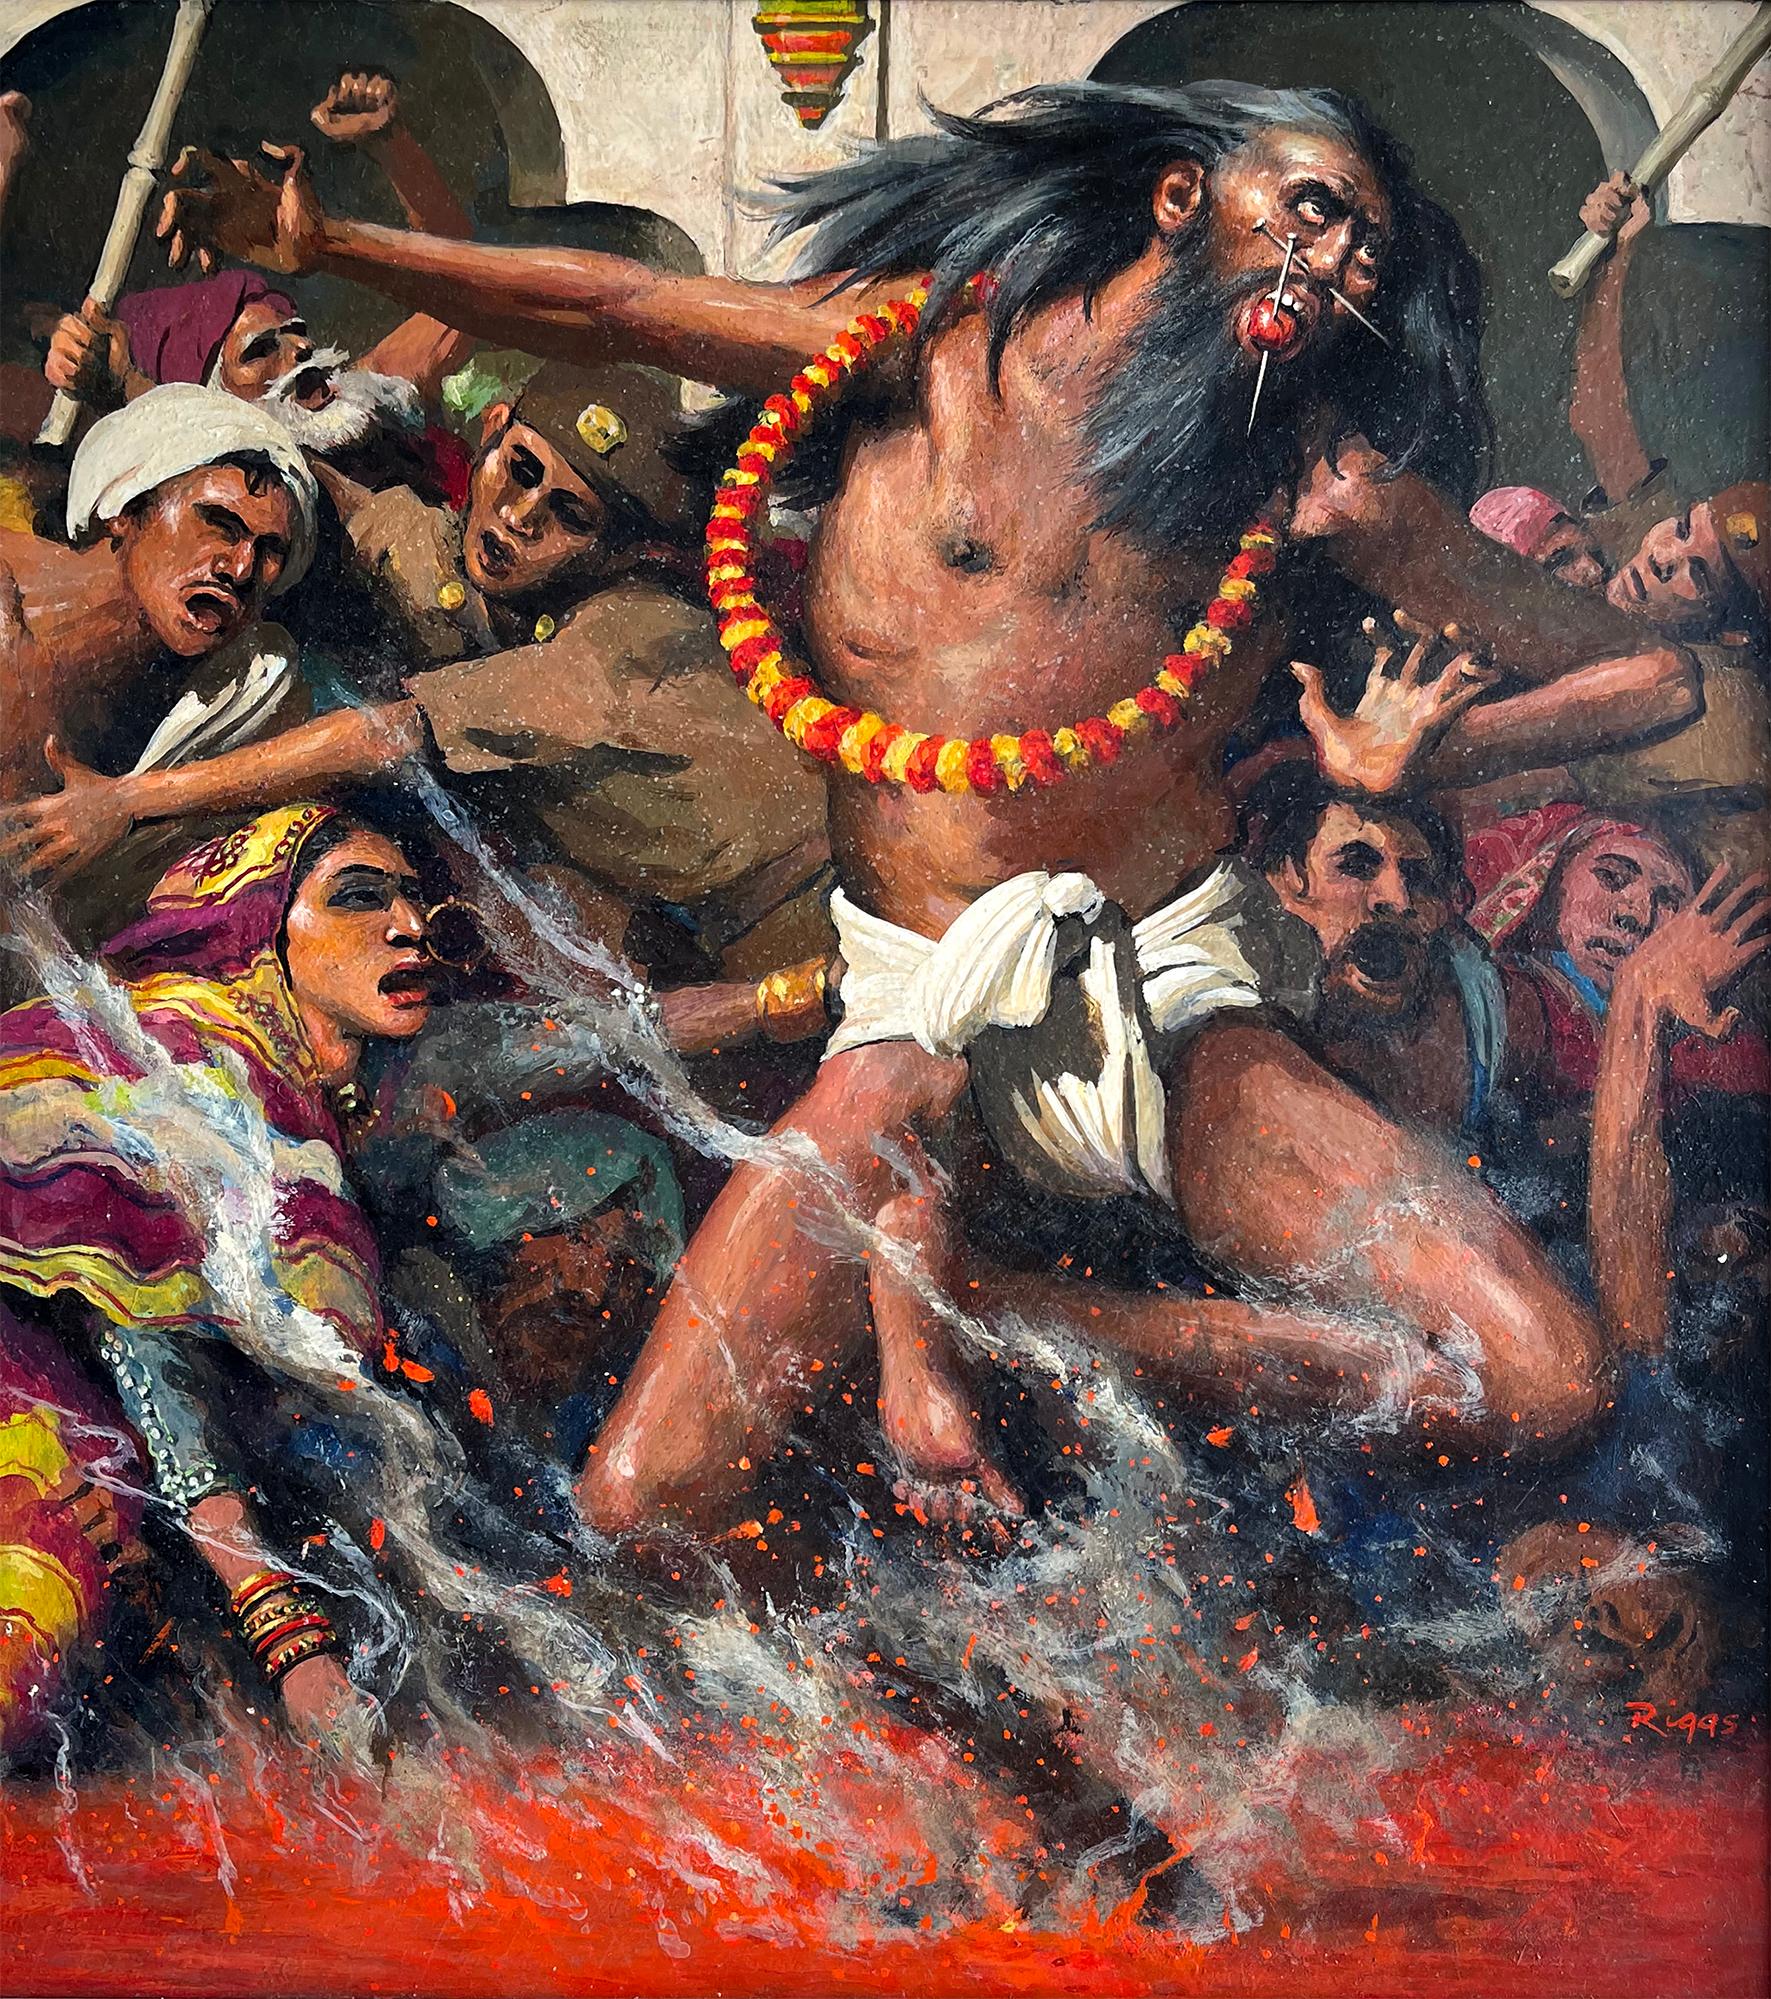 Robert Riggs Figurative Painting - Indian Ritual  Walking on Fire,  Firewalking Ceremony,  Mythology and Religion